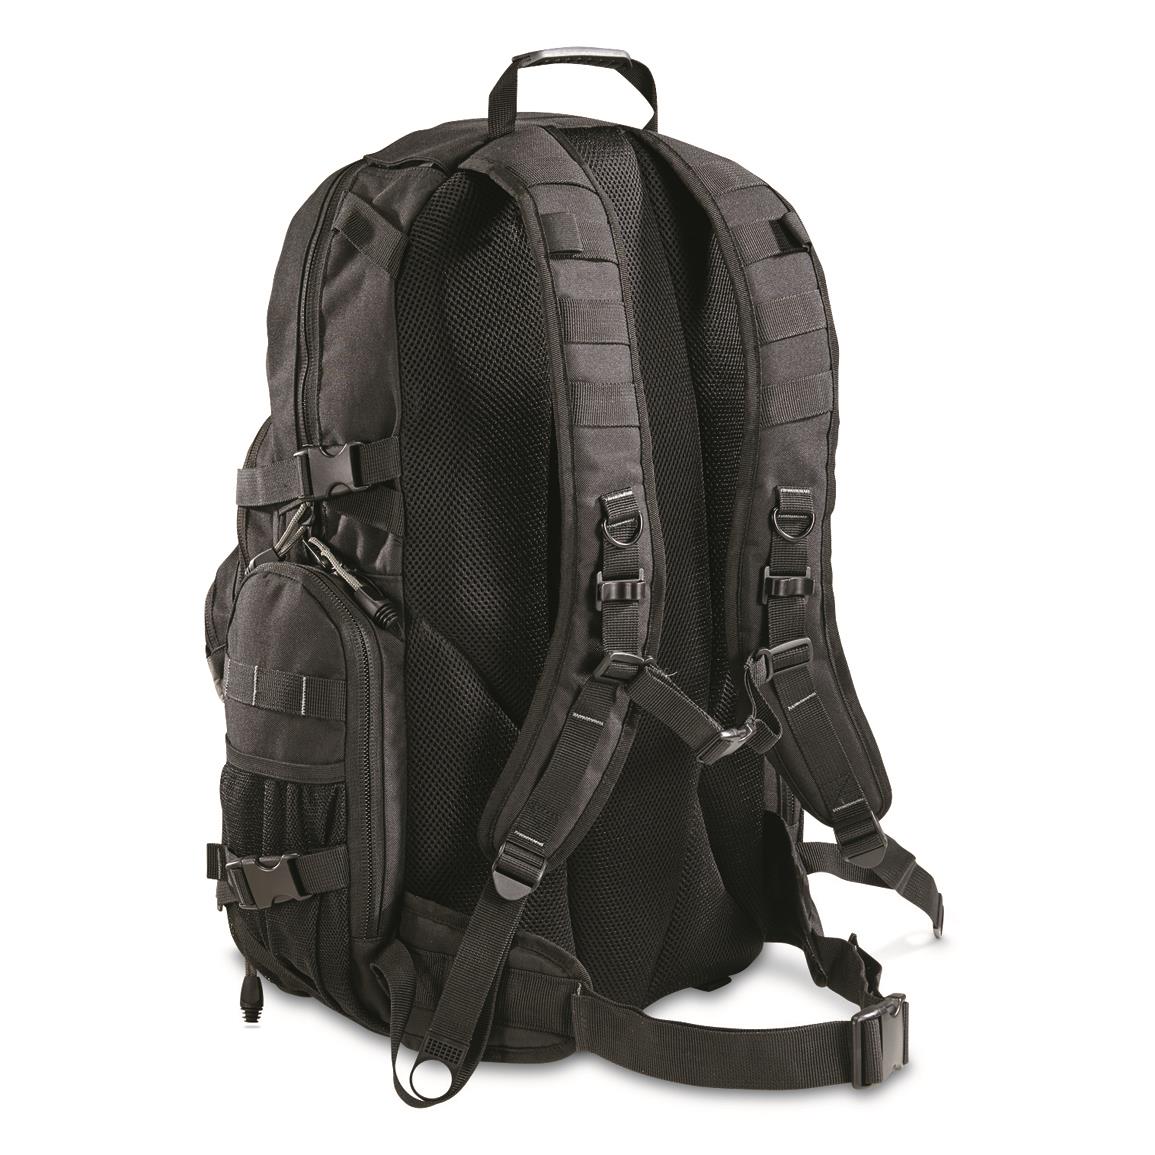 Undercover Tactical Backpack - 690243, Military Style Backpacks & Bags at Sportsman&#39;s Guide